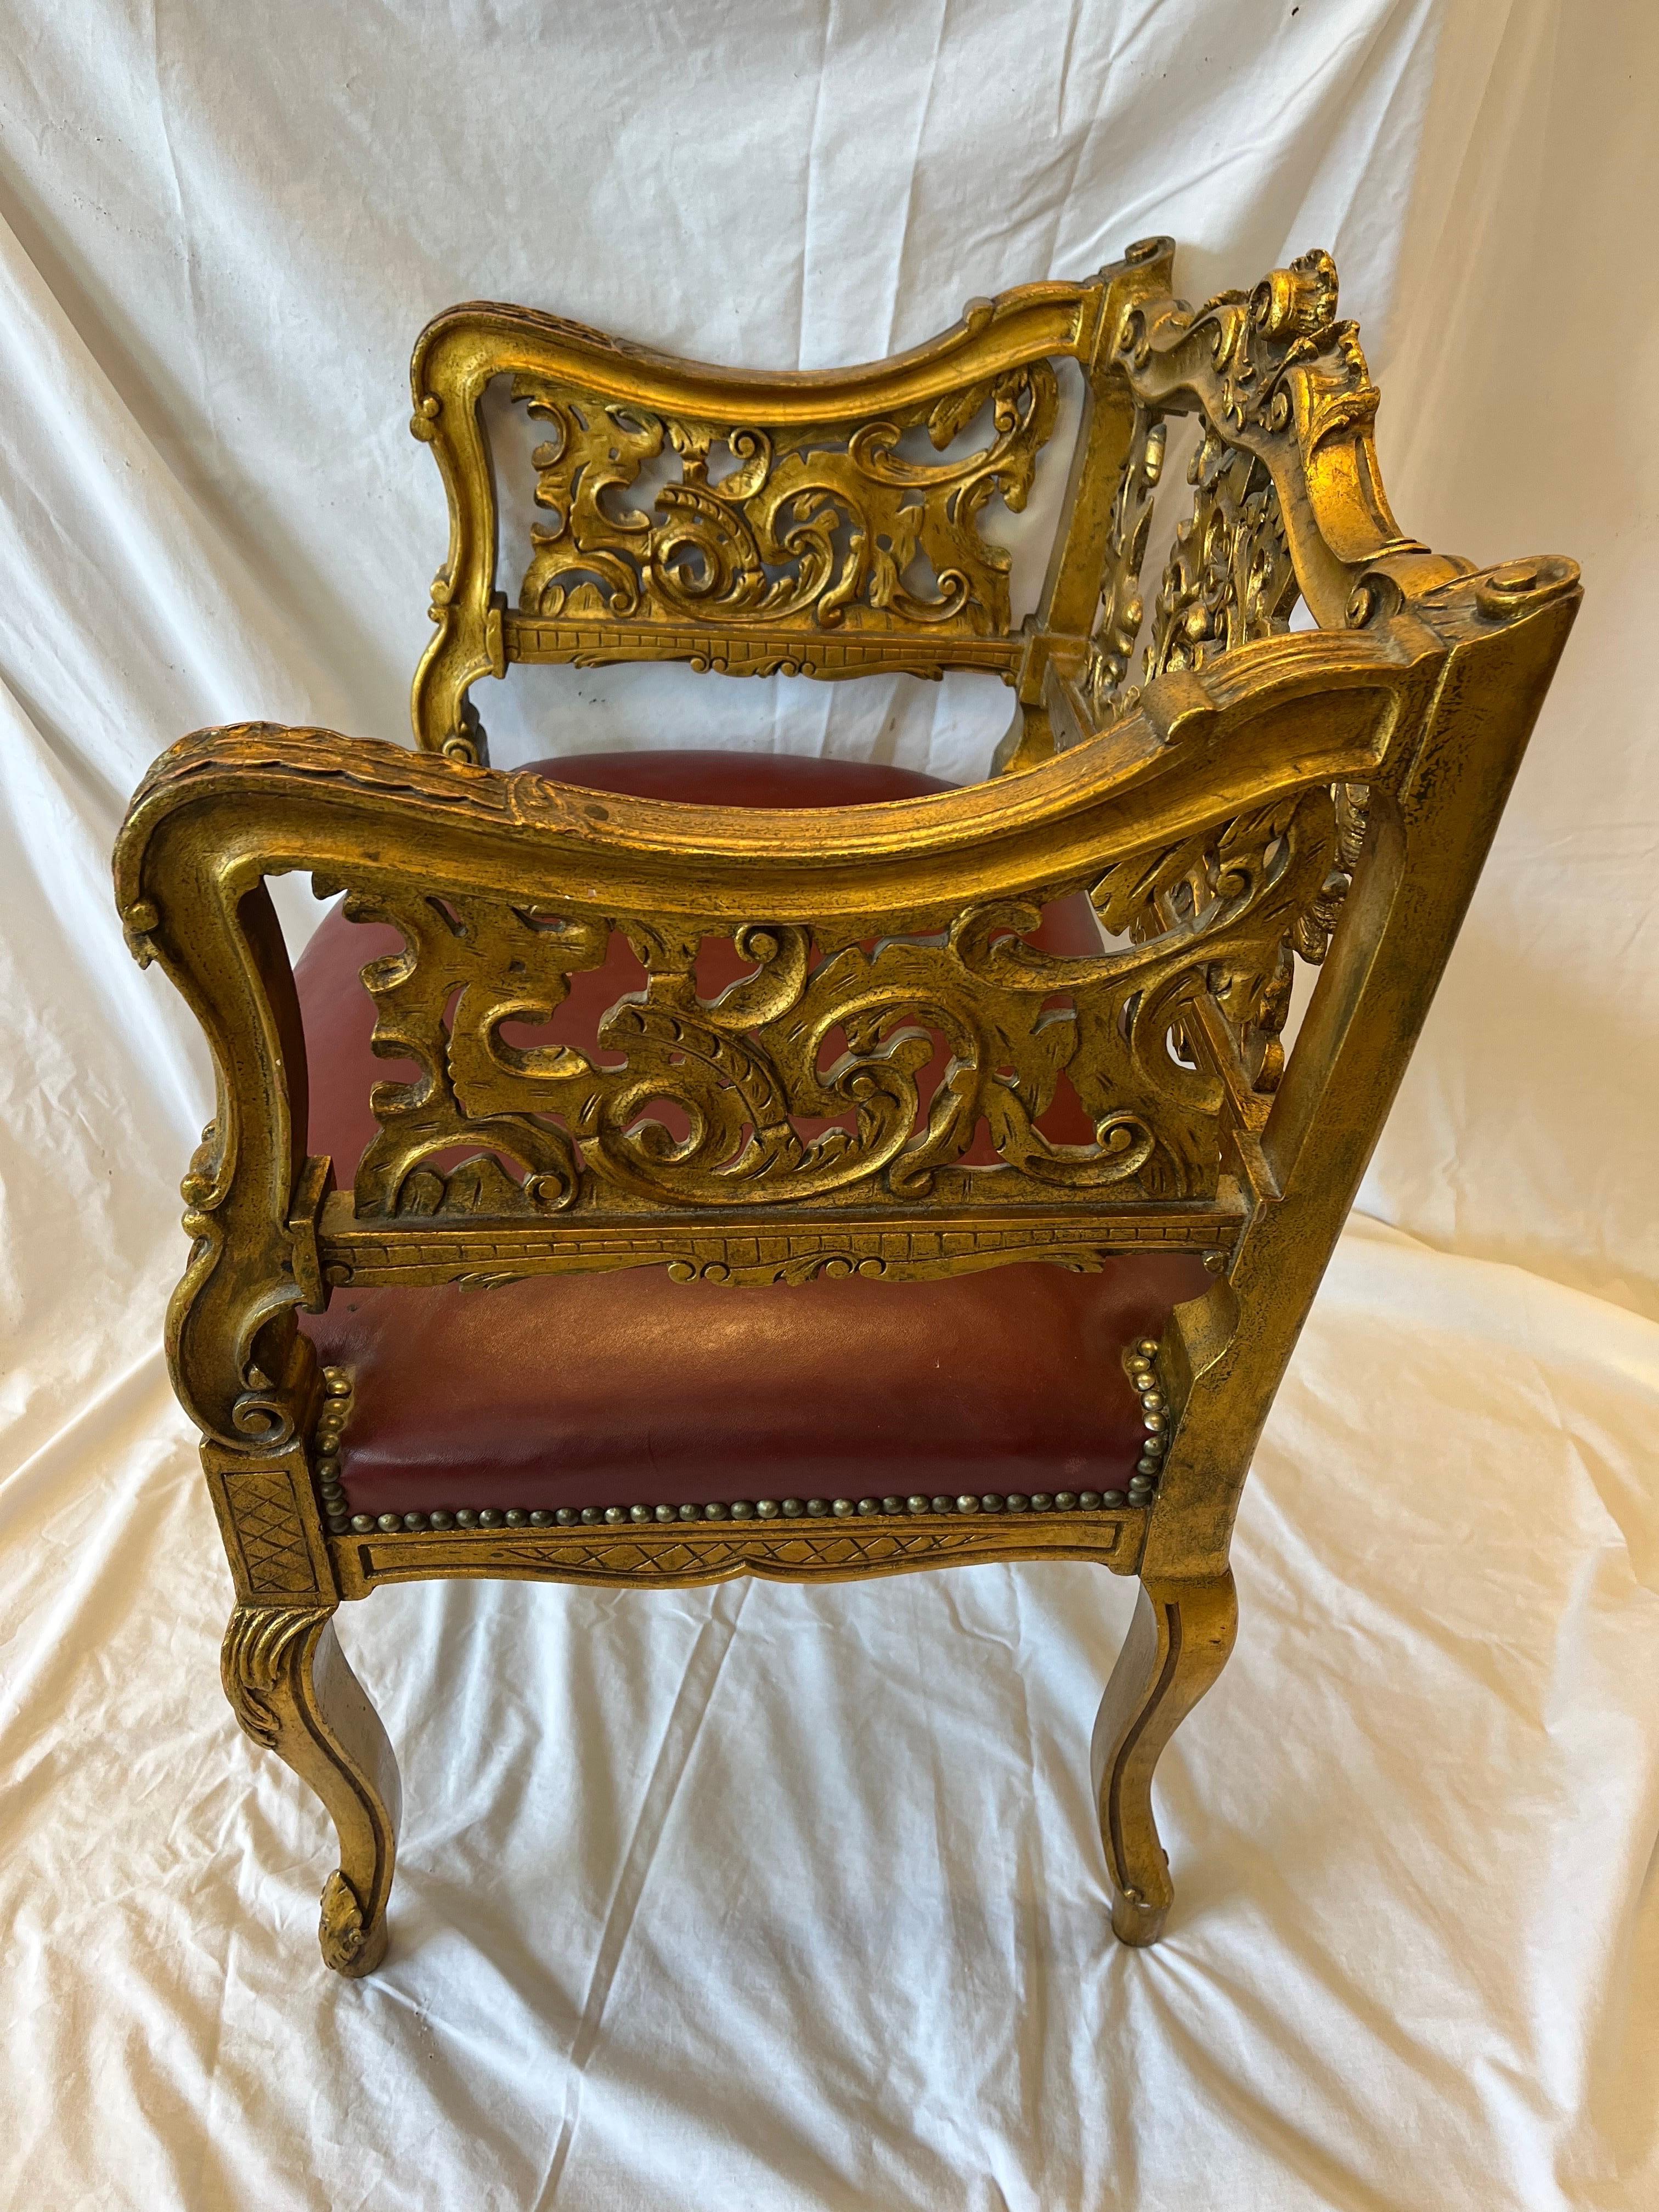 Antique Carved and Gilt Wood Arm Chair Bench Ornate Design Red Upholstered Seat For Sale 5